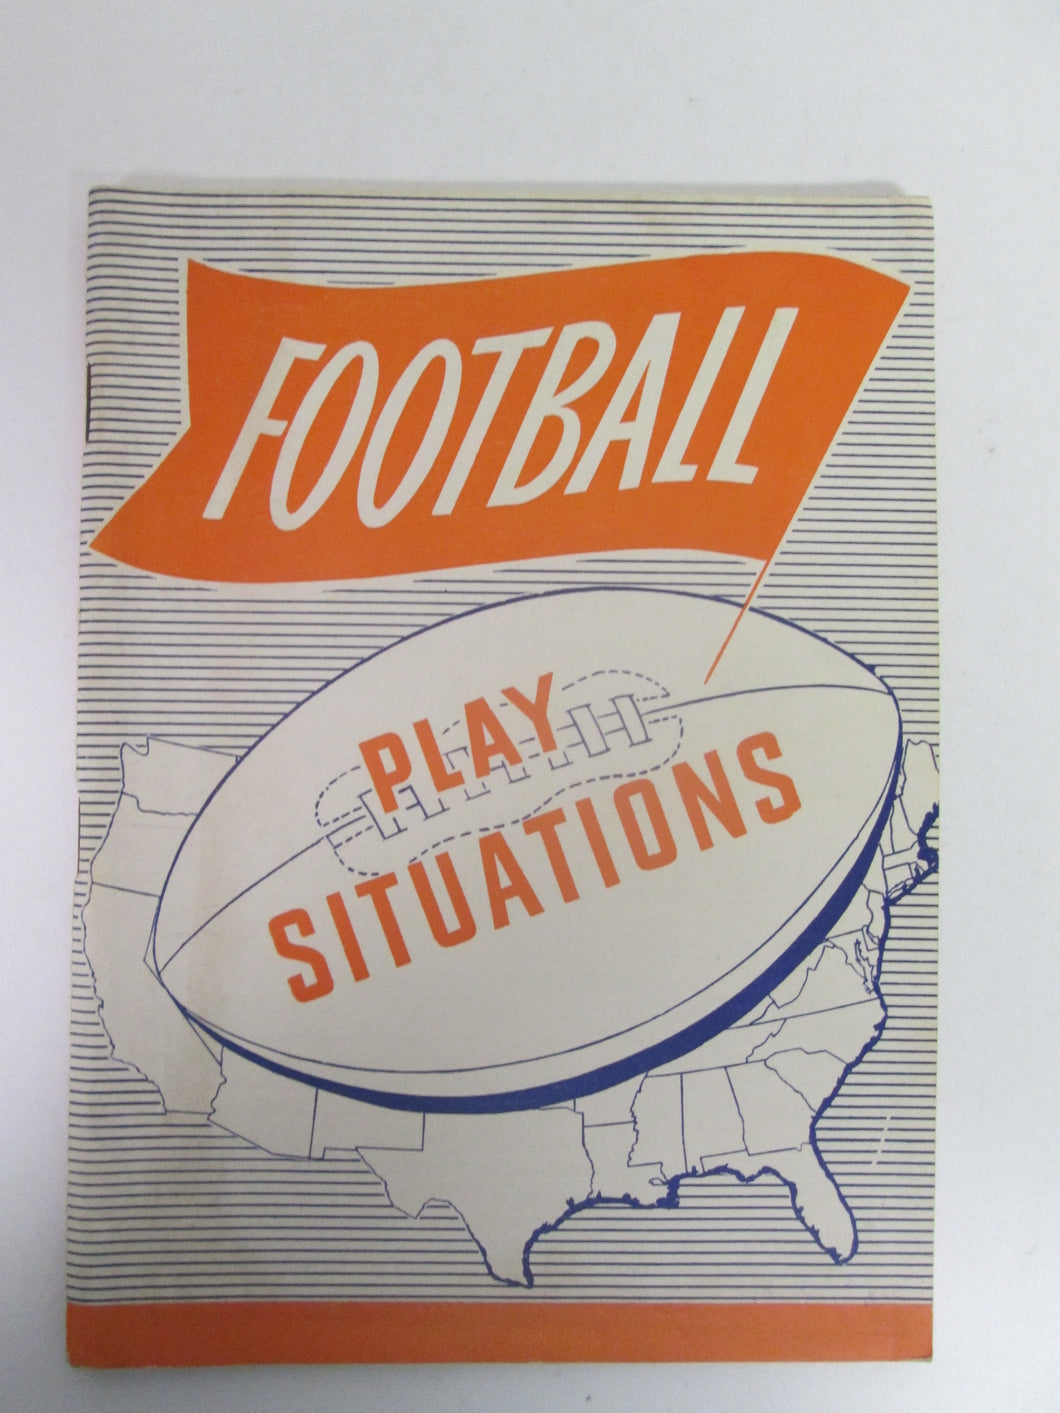 Football Play Situations National Federation 1945 By Hugh Ray (Rare)